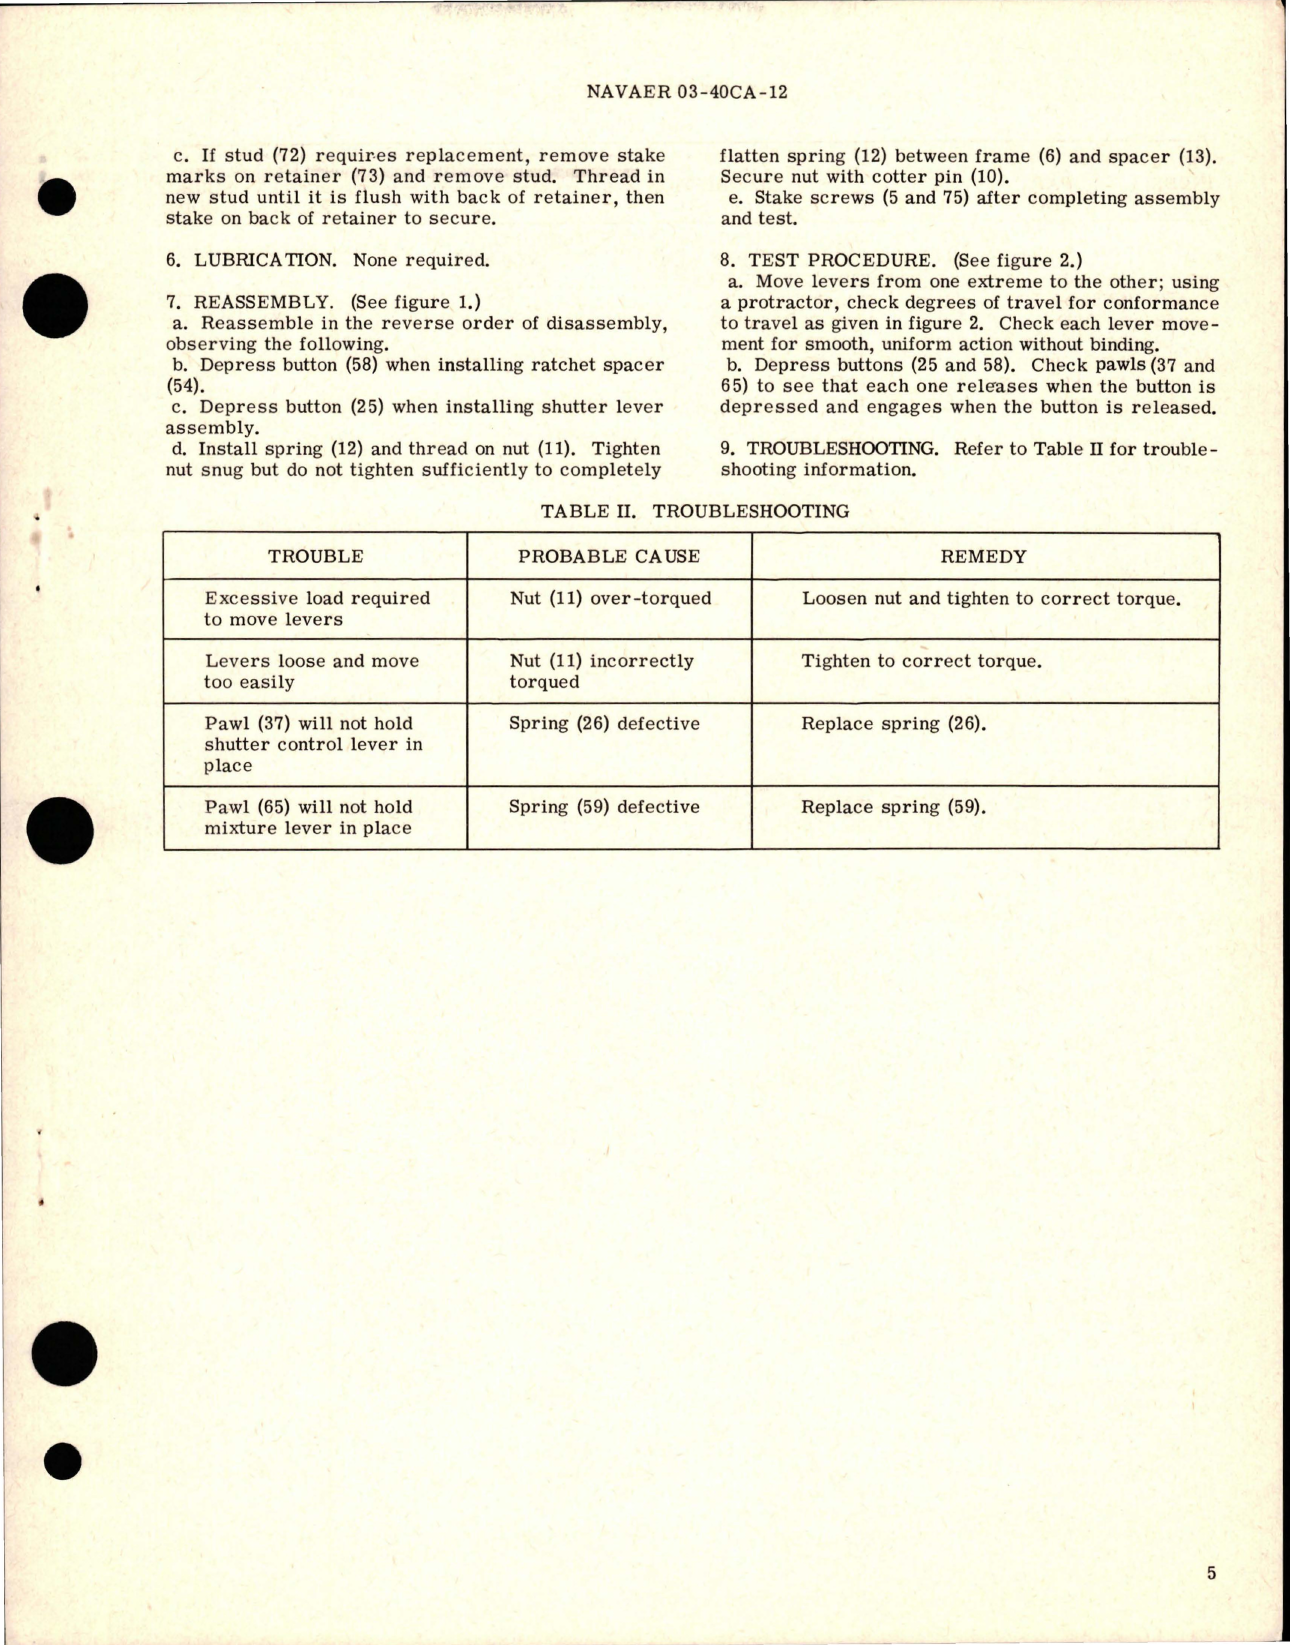 Sample page 5 from AirCorps Library document: Overhaul Instructions with Parts Breakdown for Engine Control Quadrant Assembly - Part 3L3640